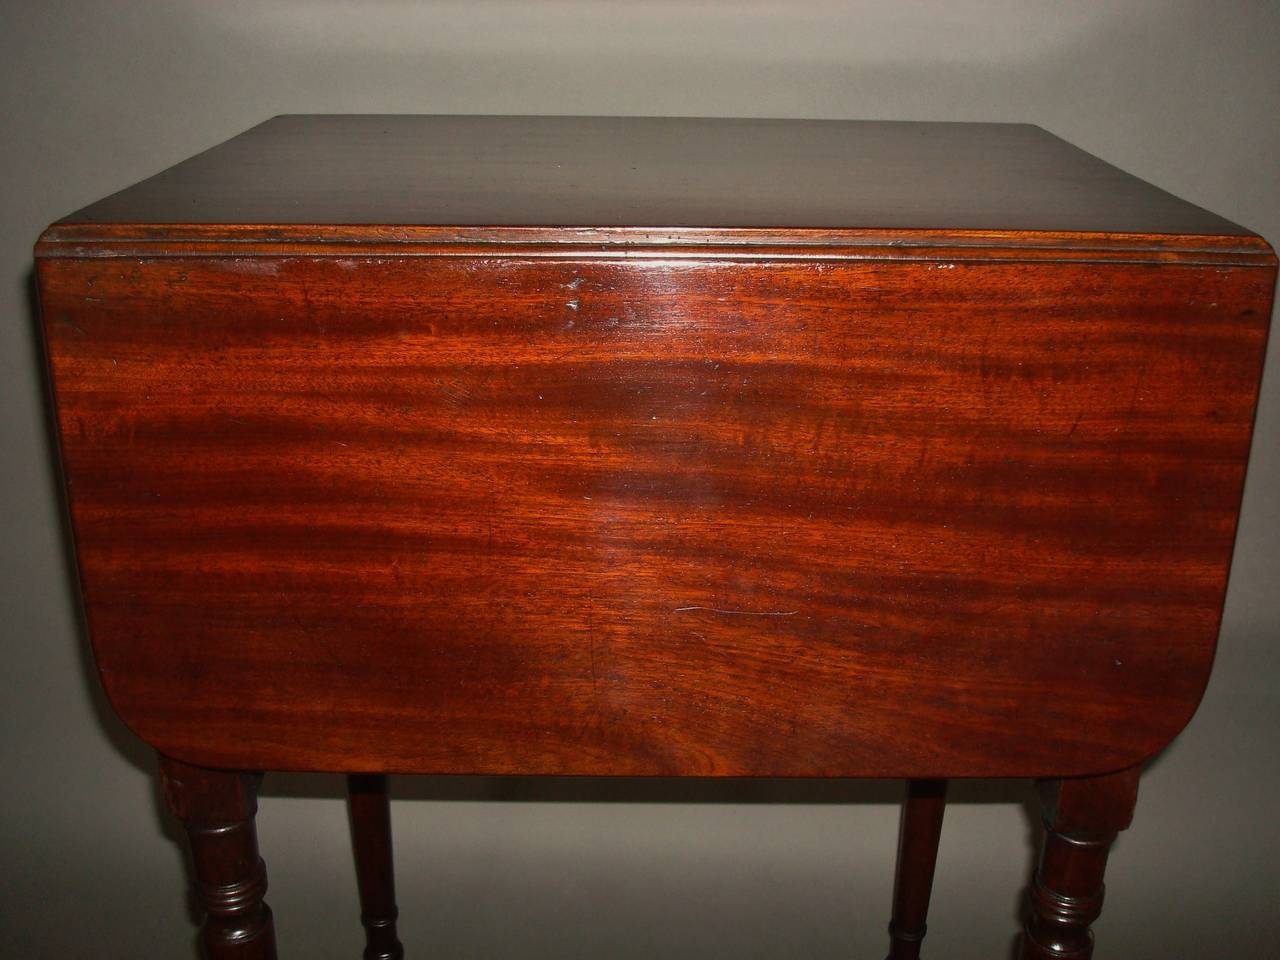 A Rare Regency Mahogany Deception Table In Excellent Condition For Sale In Moreton-in-Marsh, Gloucestershire